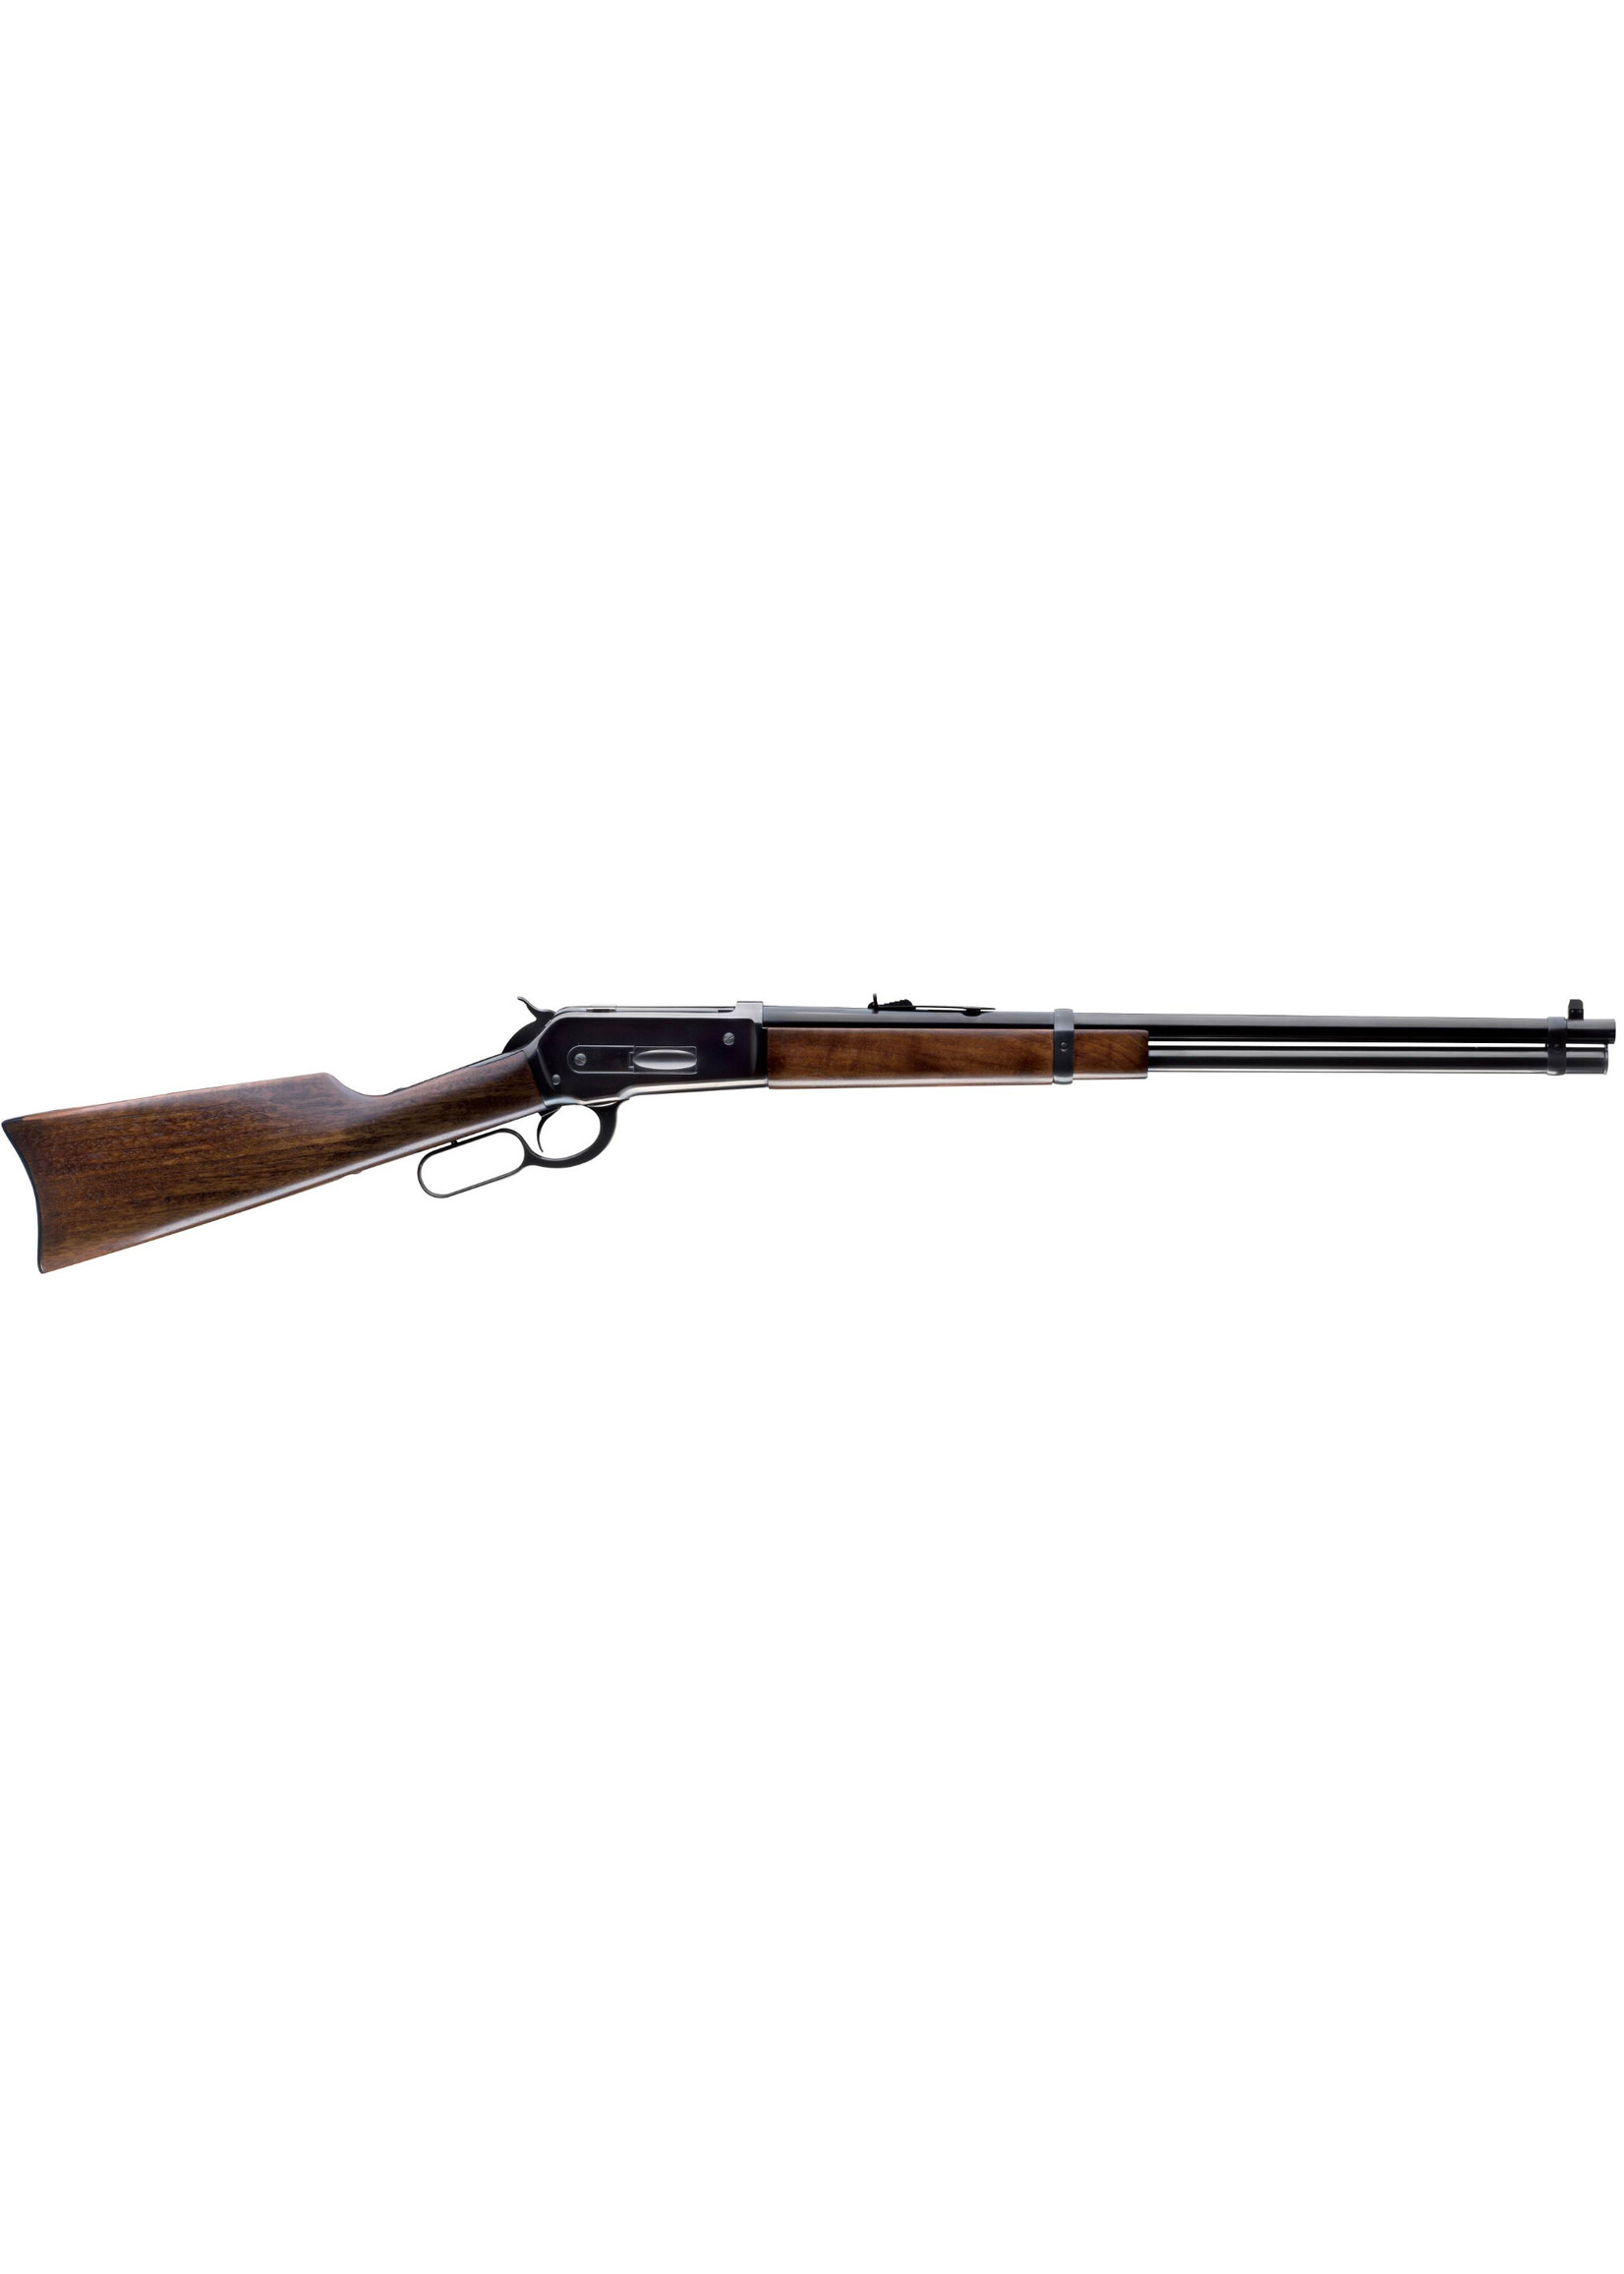 Chiappa CHIAPPA 45-70 GOVT.  LEVER ACTION  22" BRL MODEL 1886 7 RDS COLOUR CASING RECEIVER